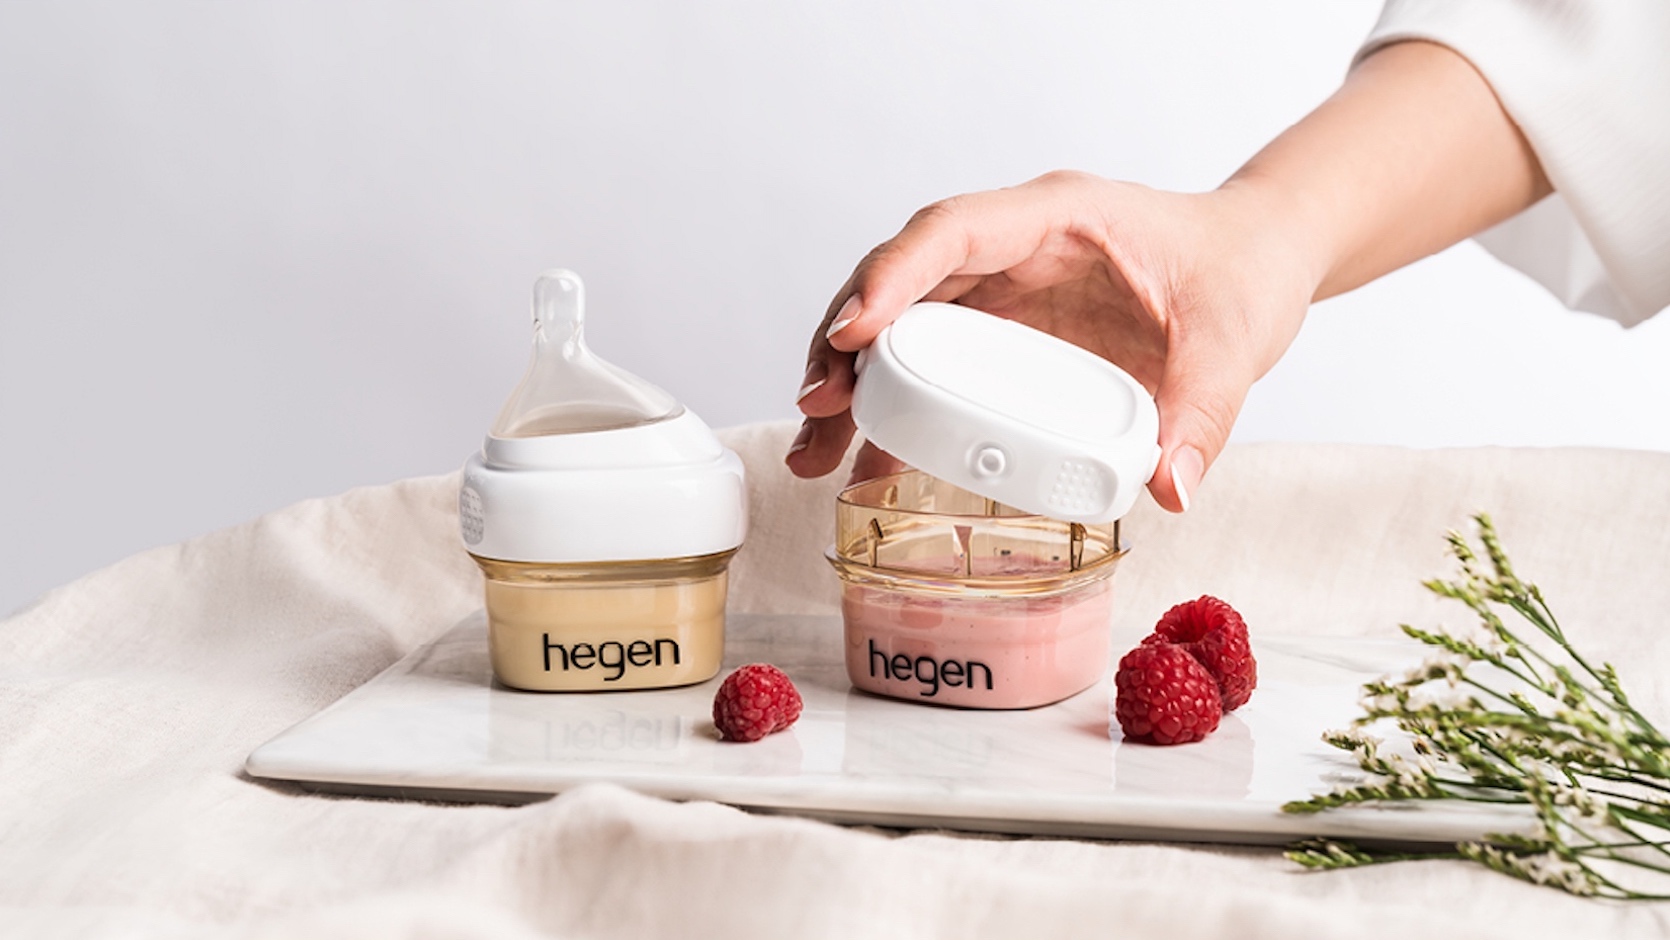 Products from Hegen